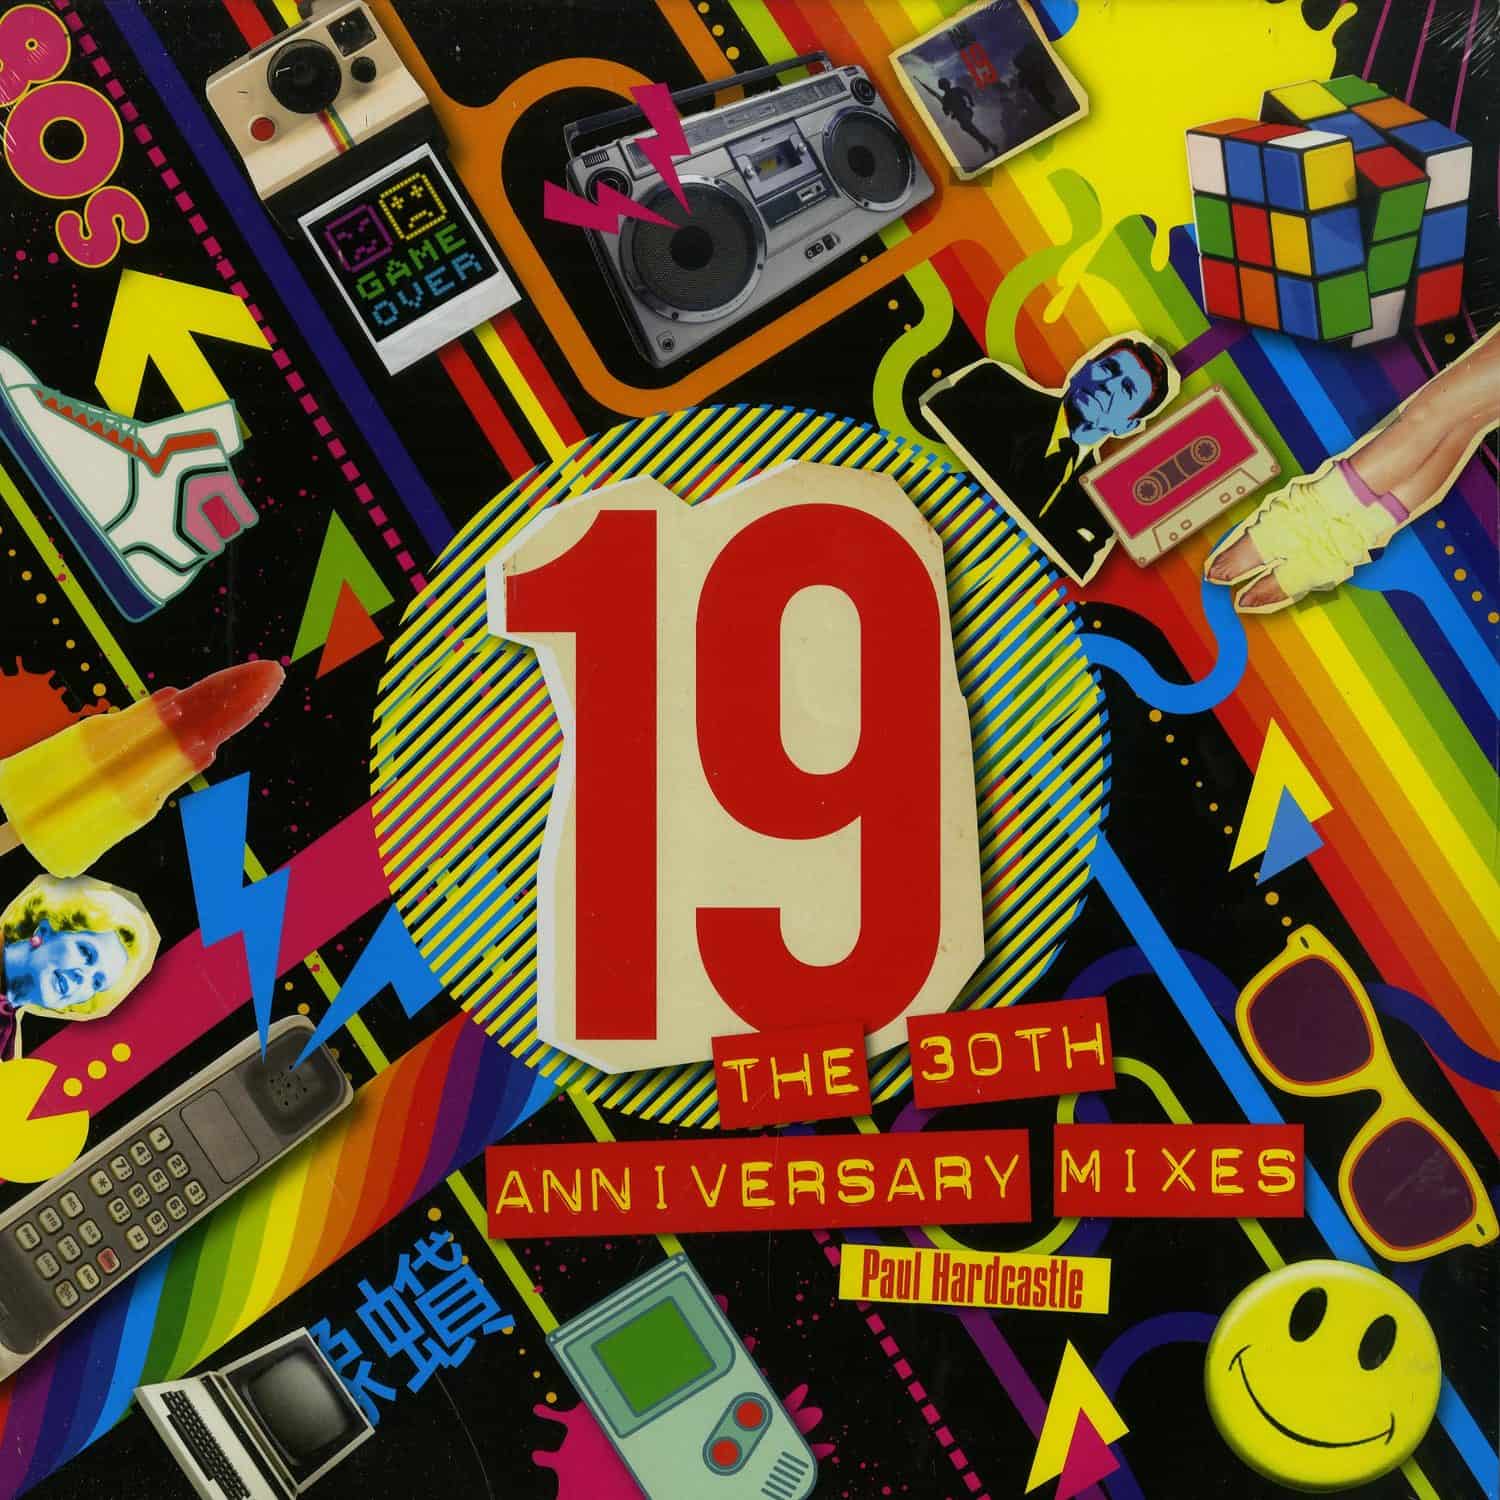 Paul Hardcastle - 19 - THE 30TH ANNIVERSARY MIXES 